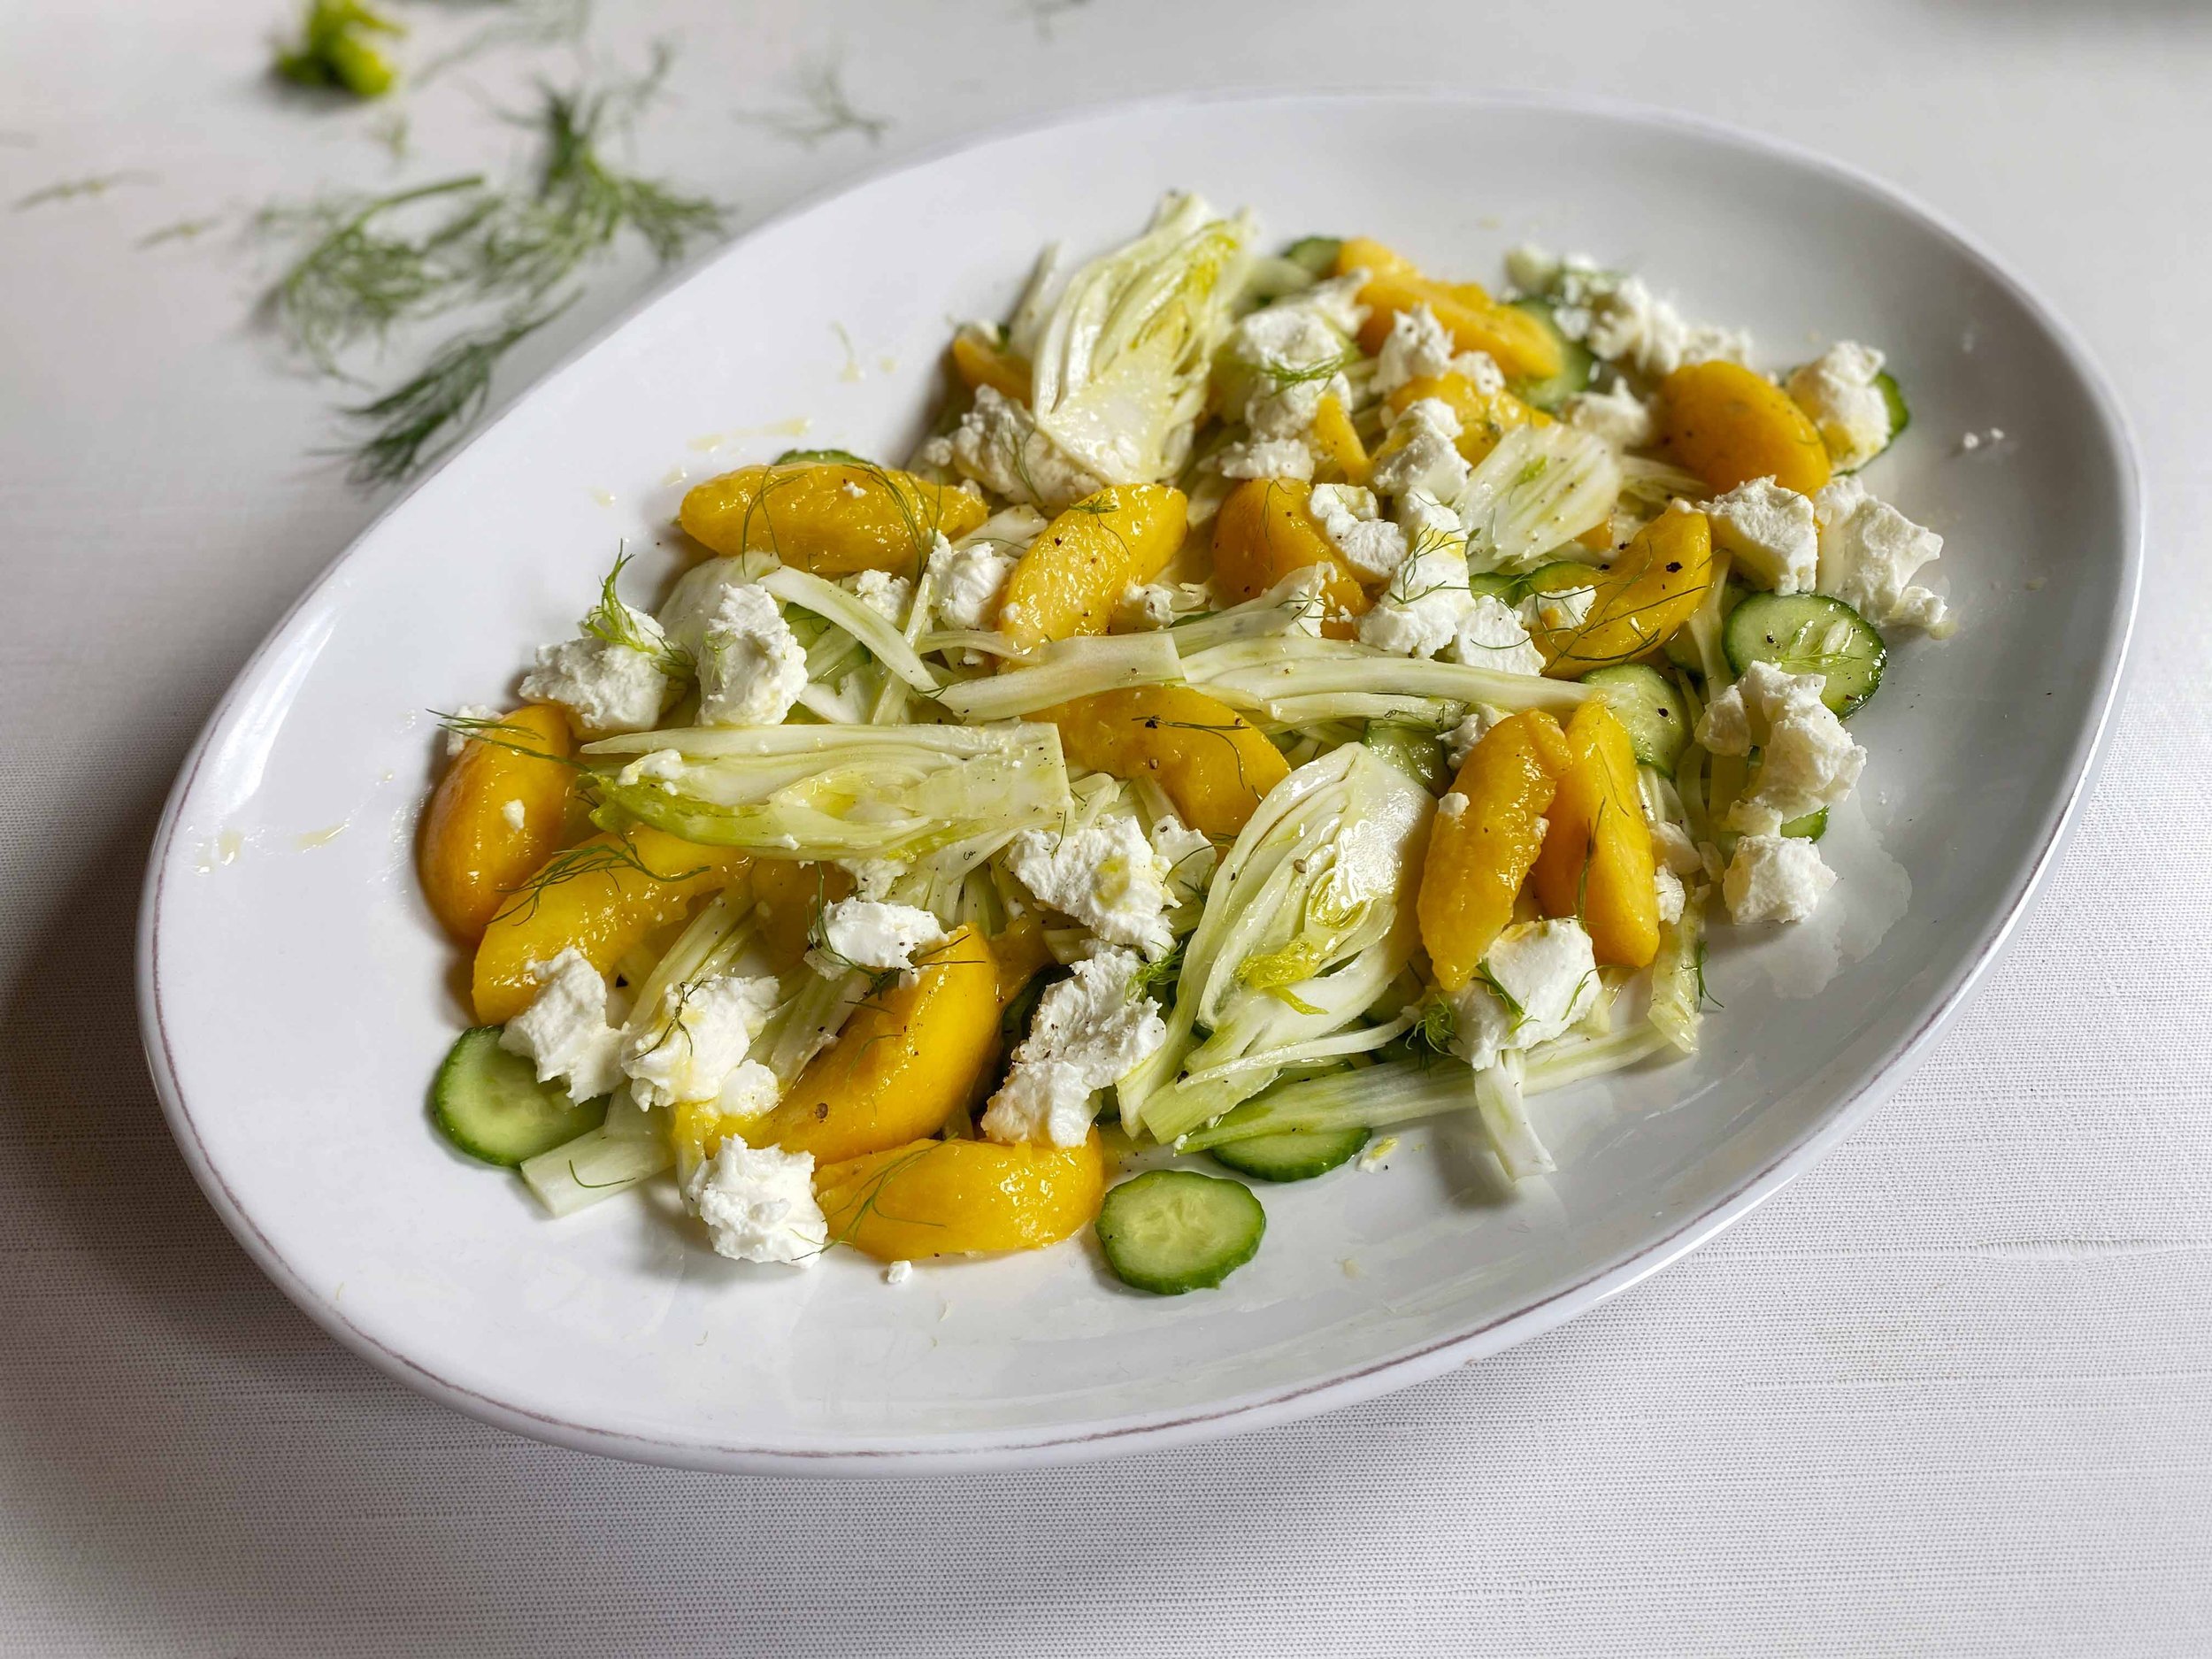 Fennel, Peaches and Goat Cheese Salad